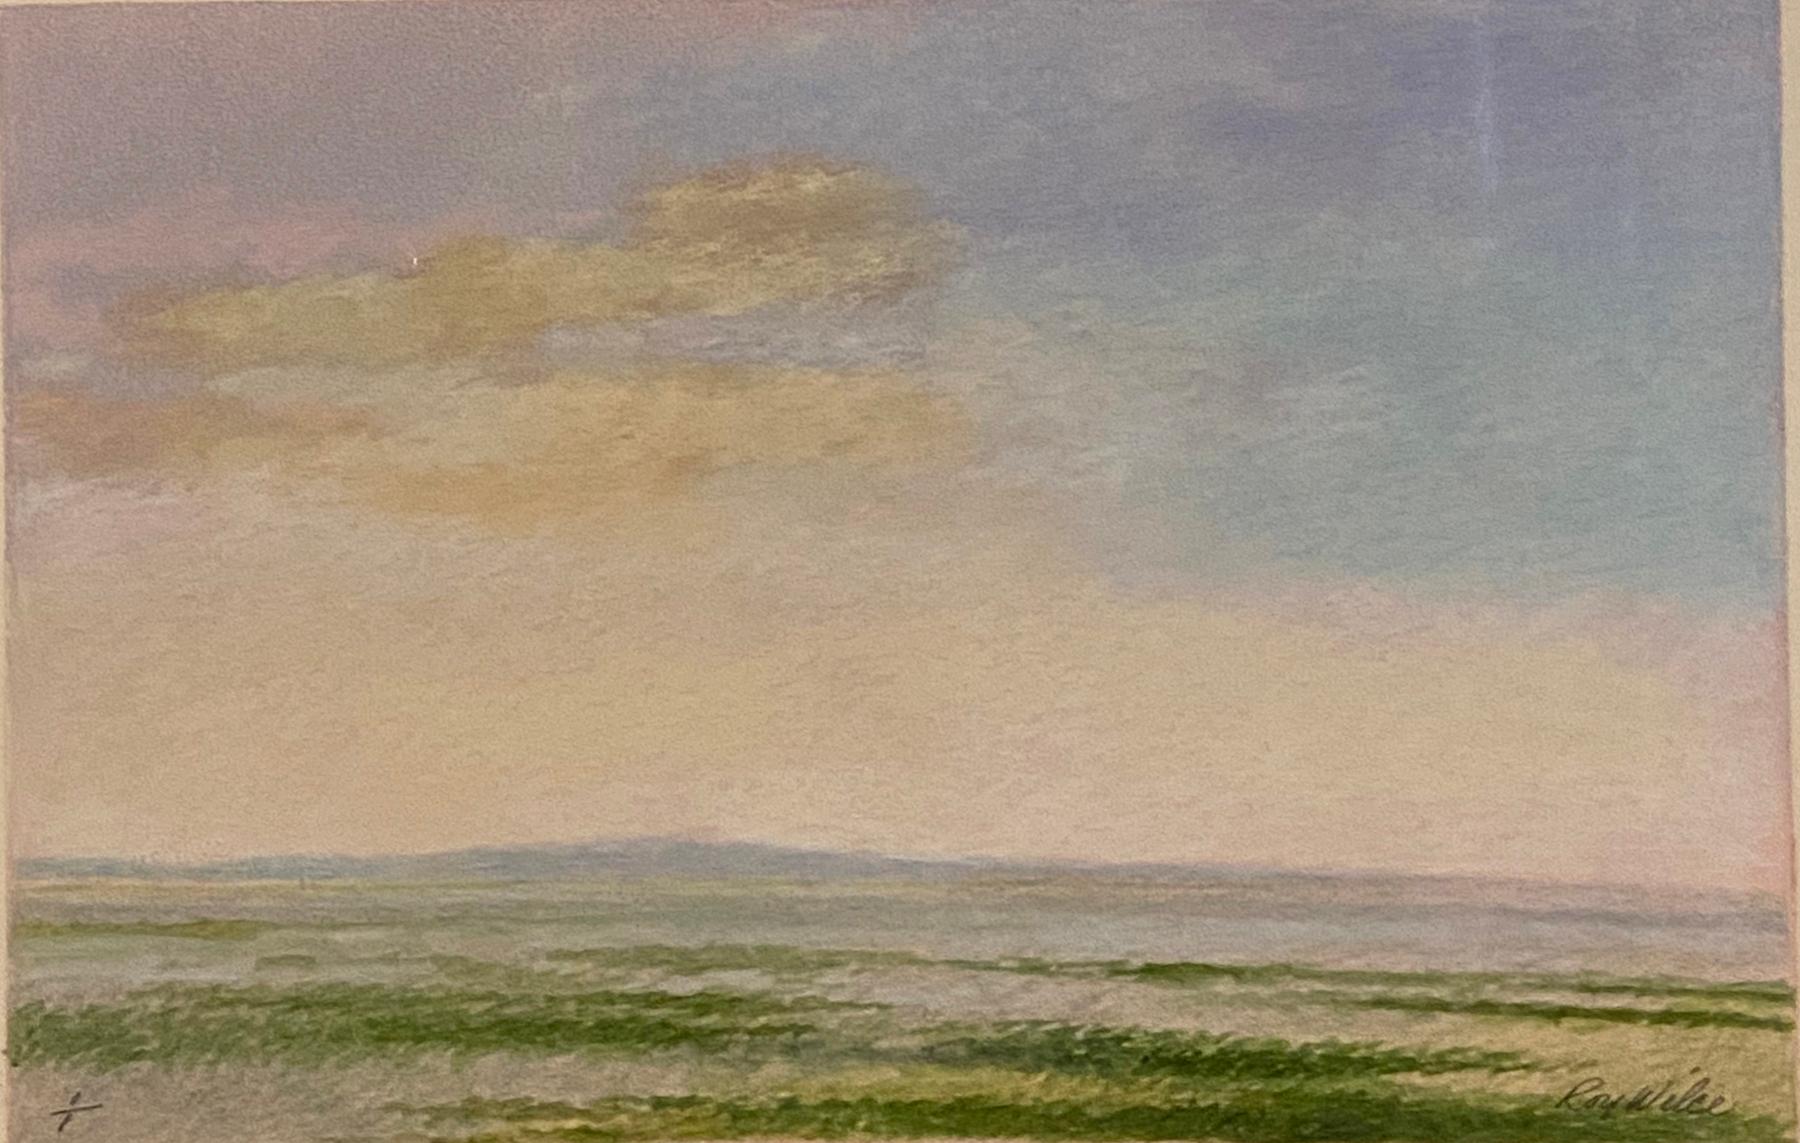 Untitled II, unframed oil pastel landscape study - Painting by Roy Wilce